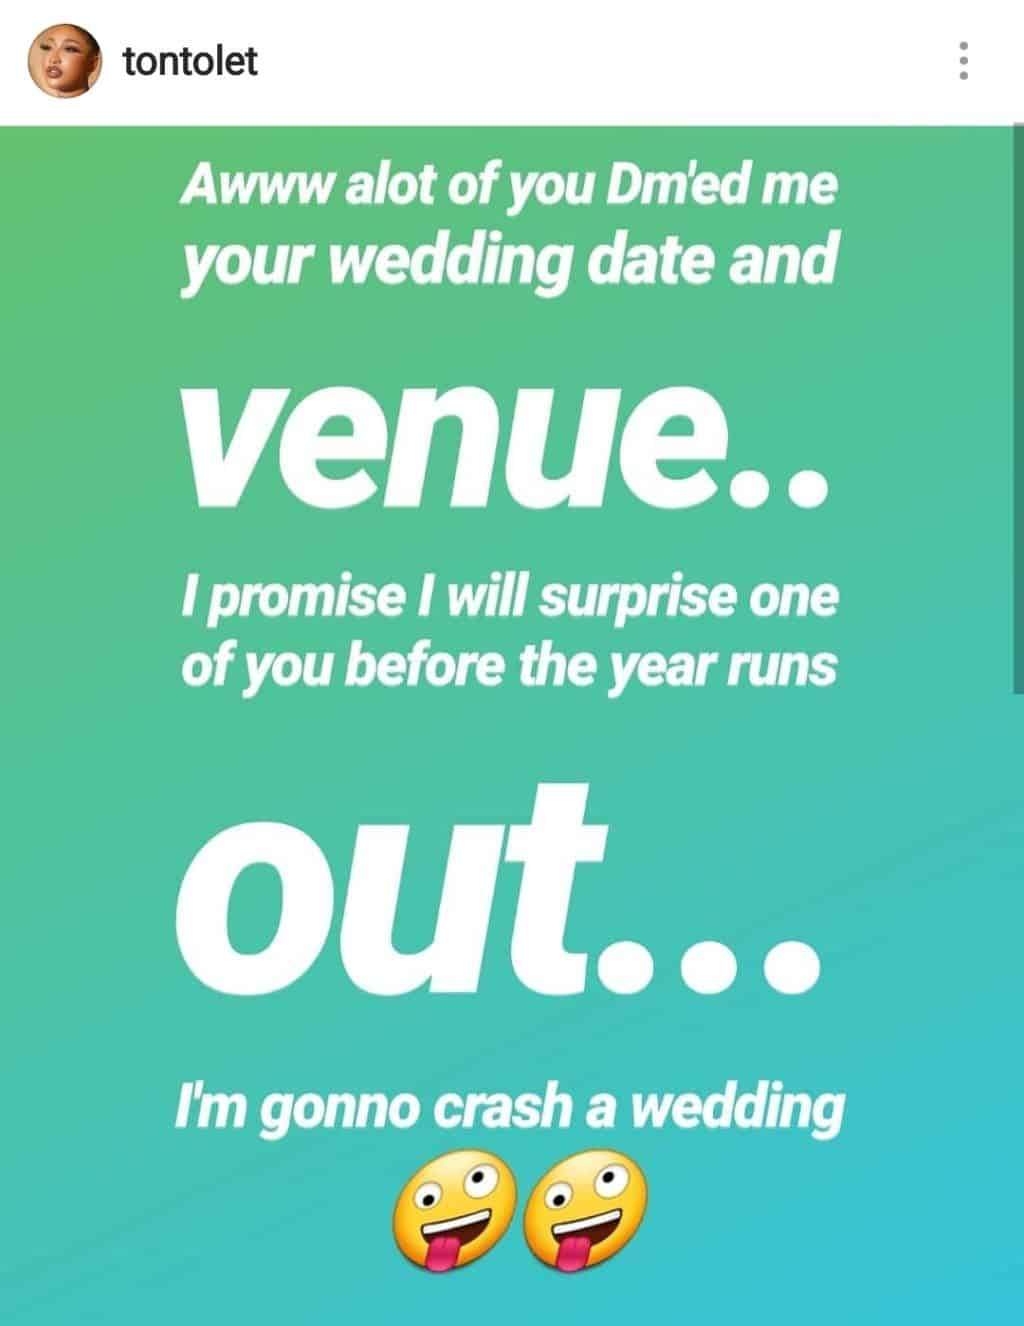 Tonto Dikeh promises to attend wedding of one lucky fan